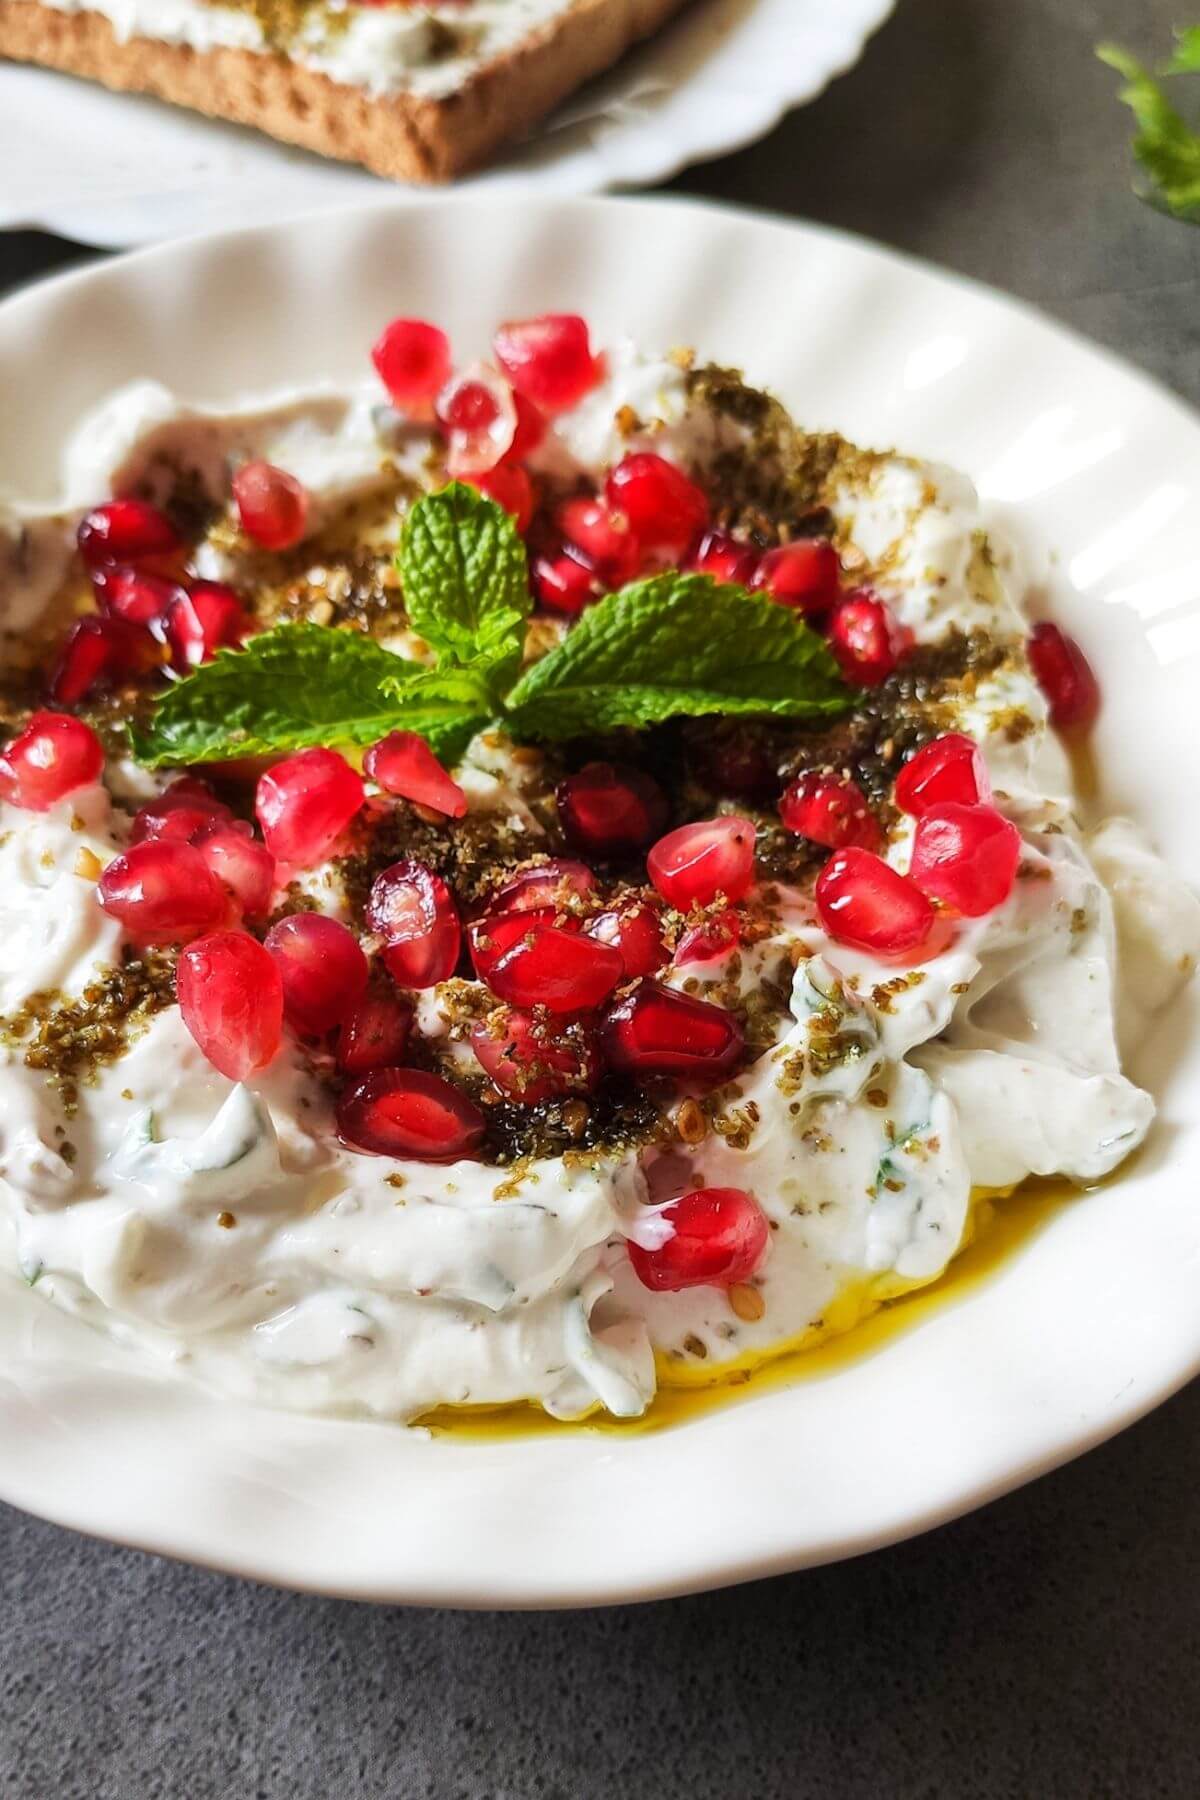 Garlic labneh garnish with za'atar, olive oil, pomegranate, and mint leaves